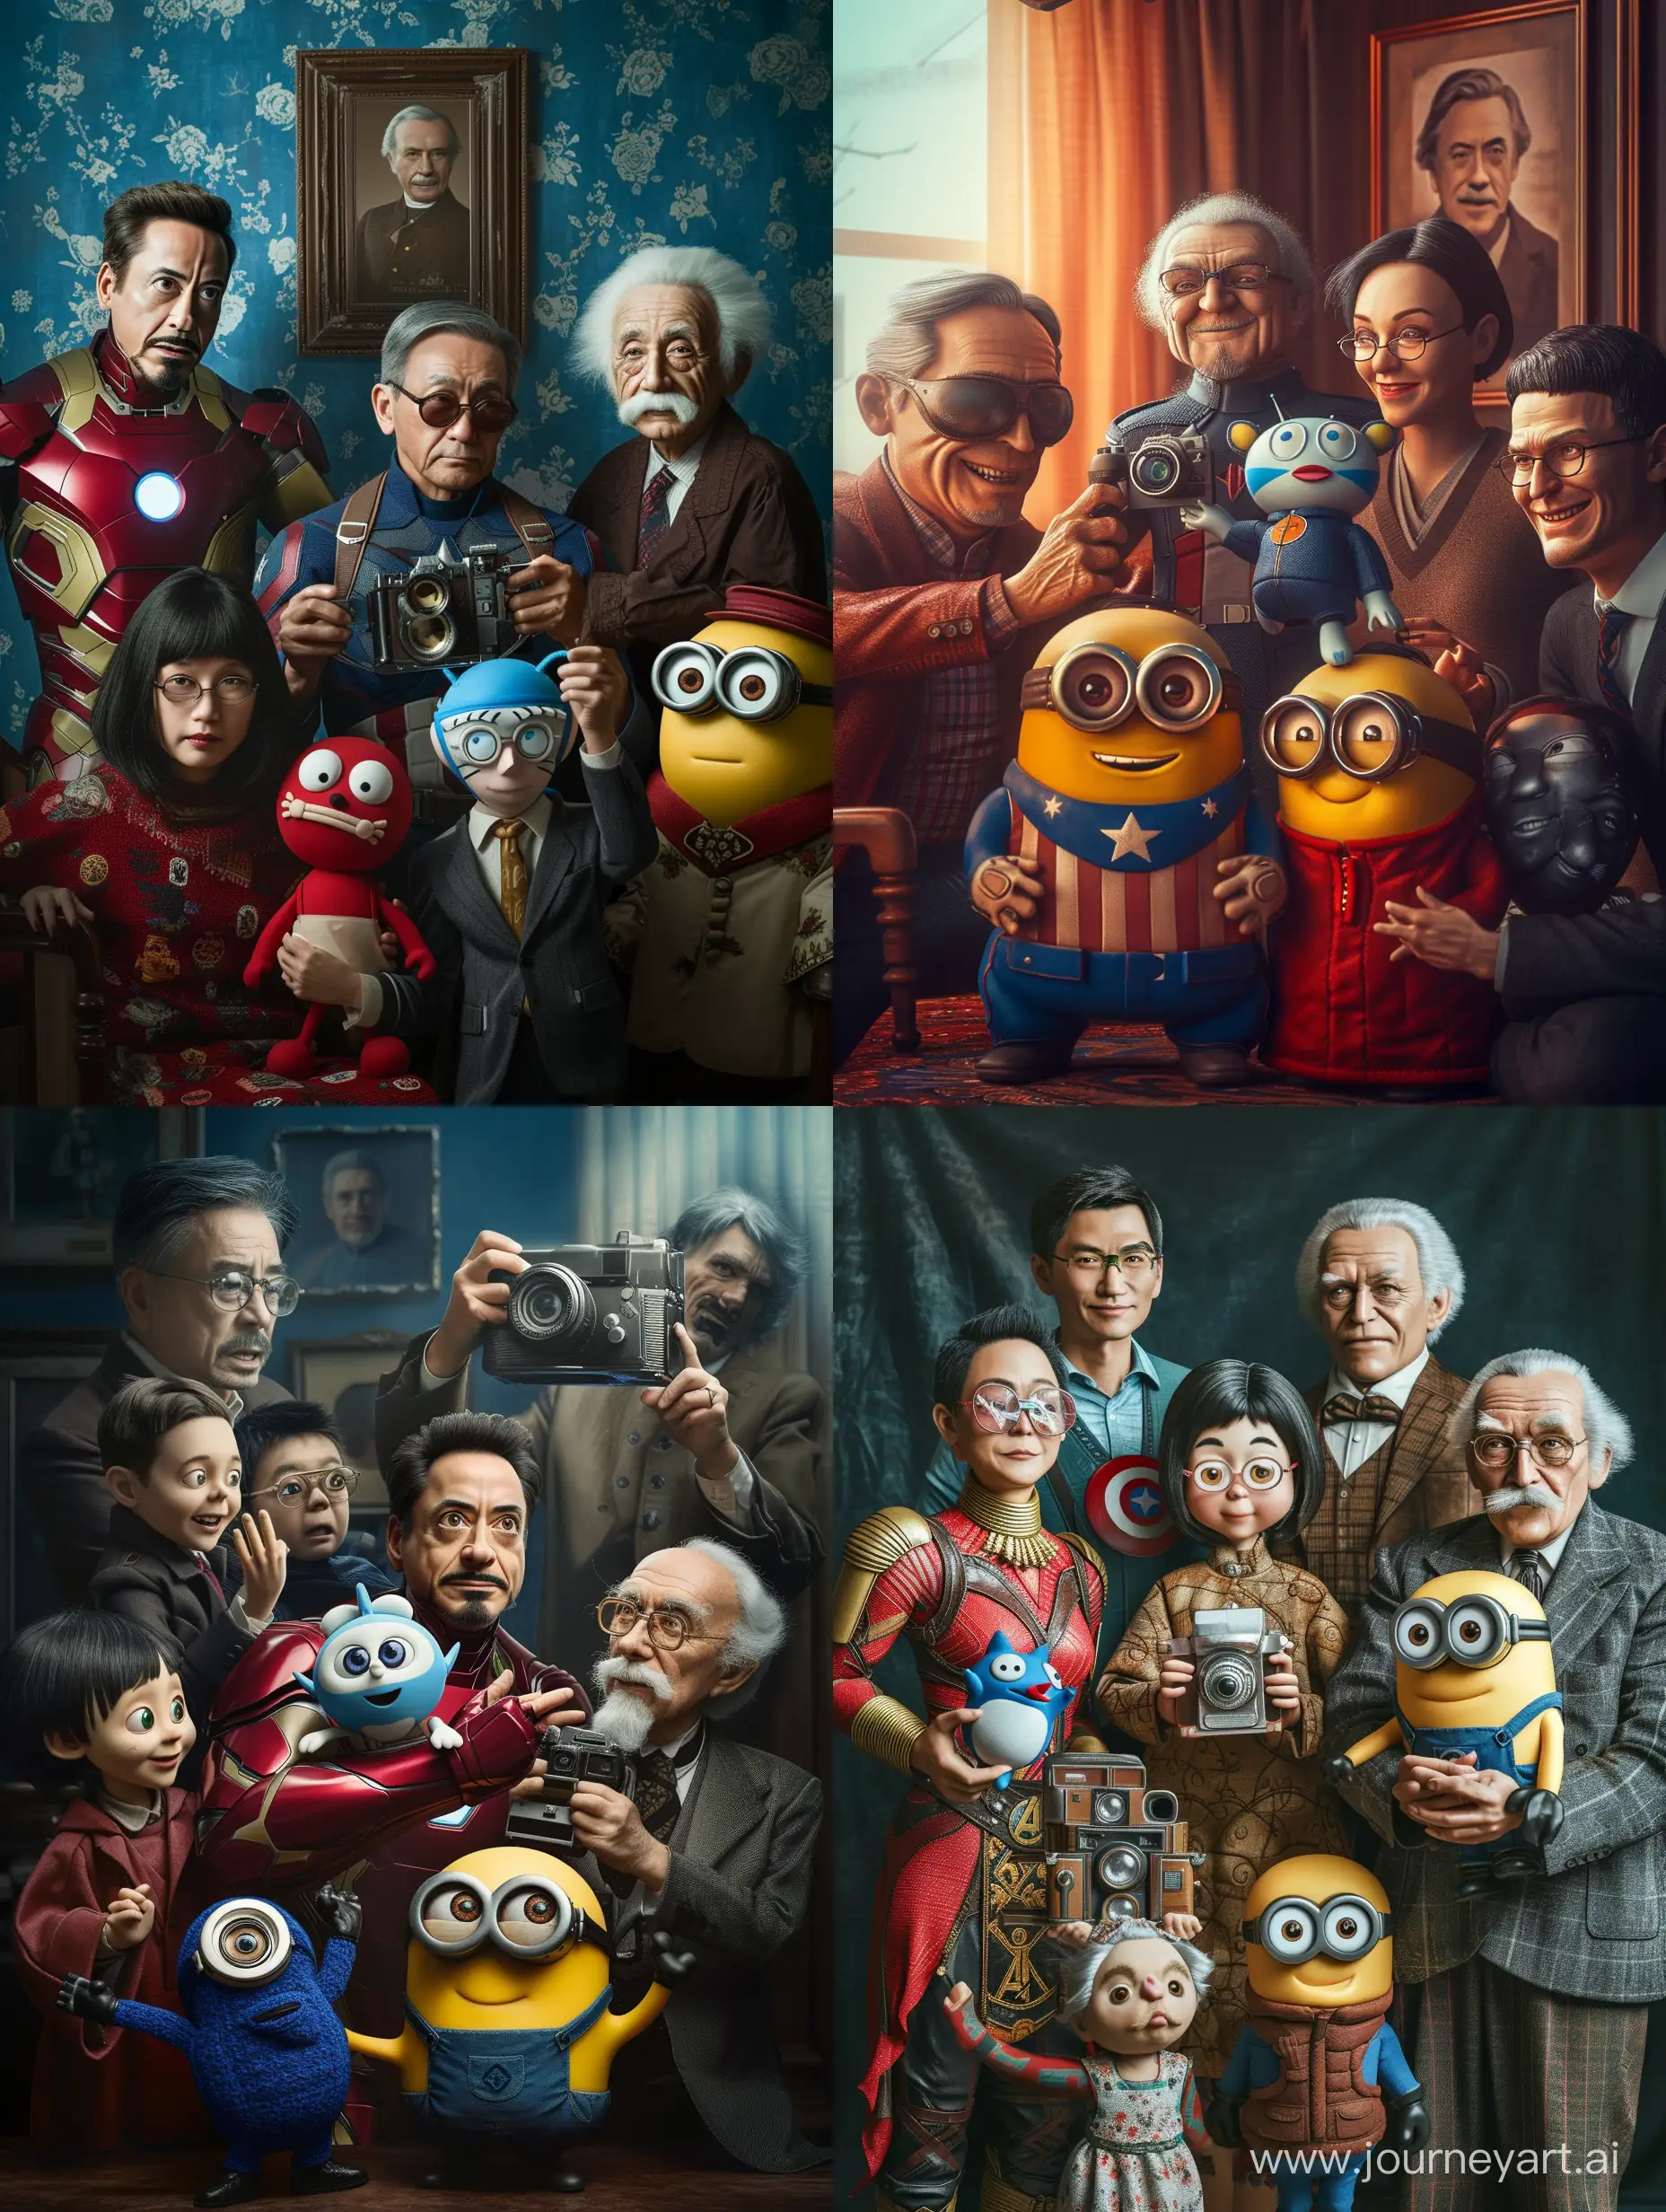 Multigenerational-Family-Portrait-with-Marvel-Avengers-Minion-Doraemon-and-Naruto-Characters